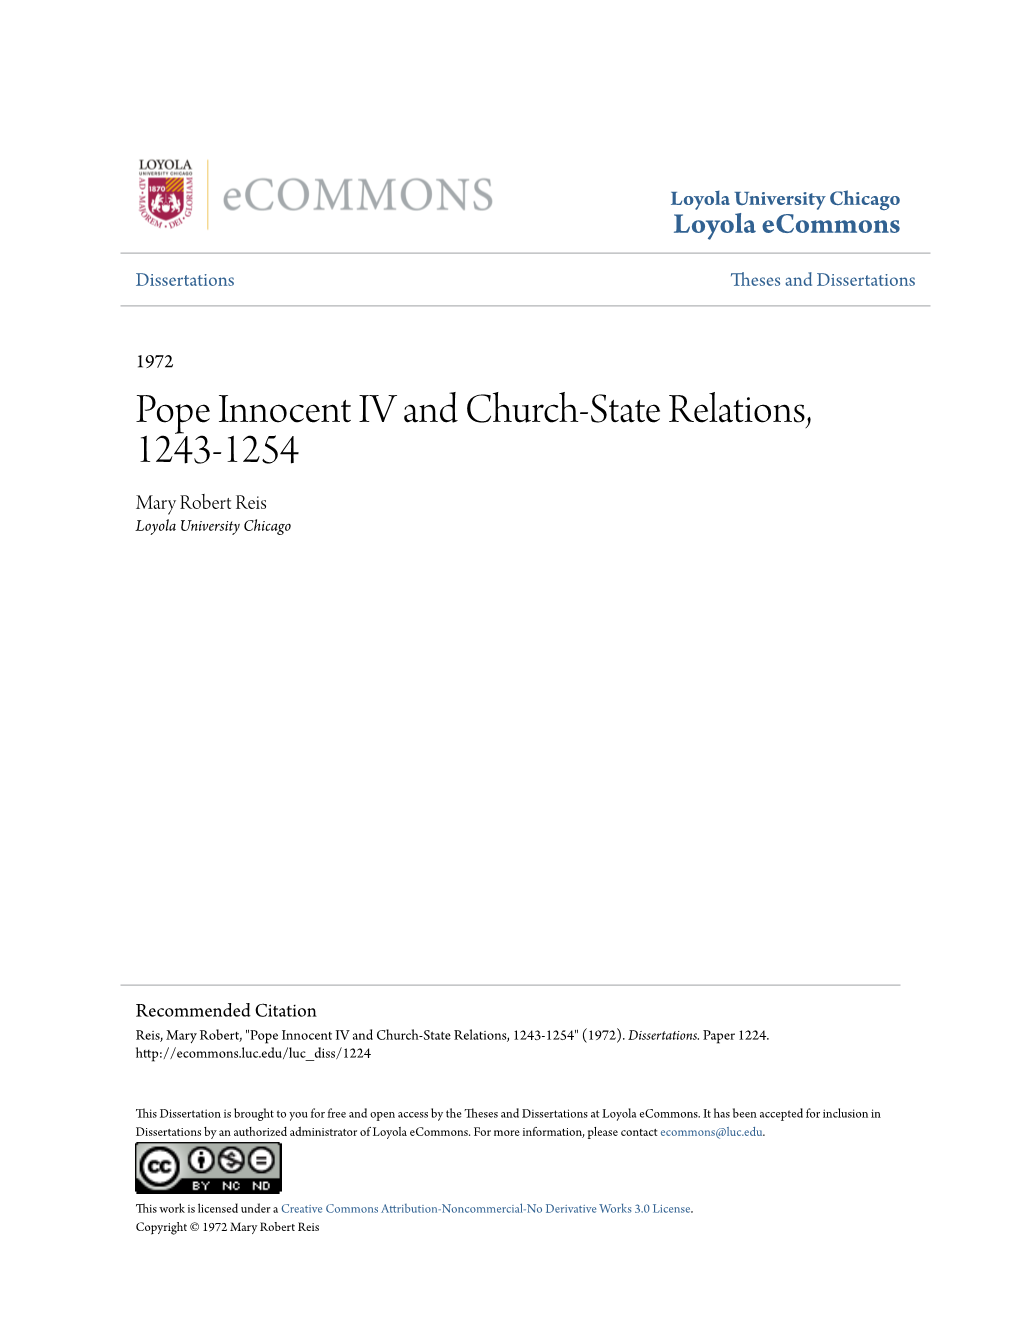 Pope Innocent IV and Church-State Relations, 1243-1254 Mary Robert Reis Loyola University Chicago